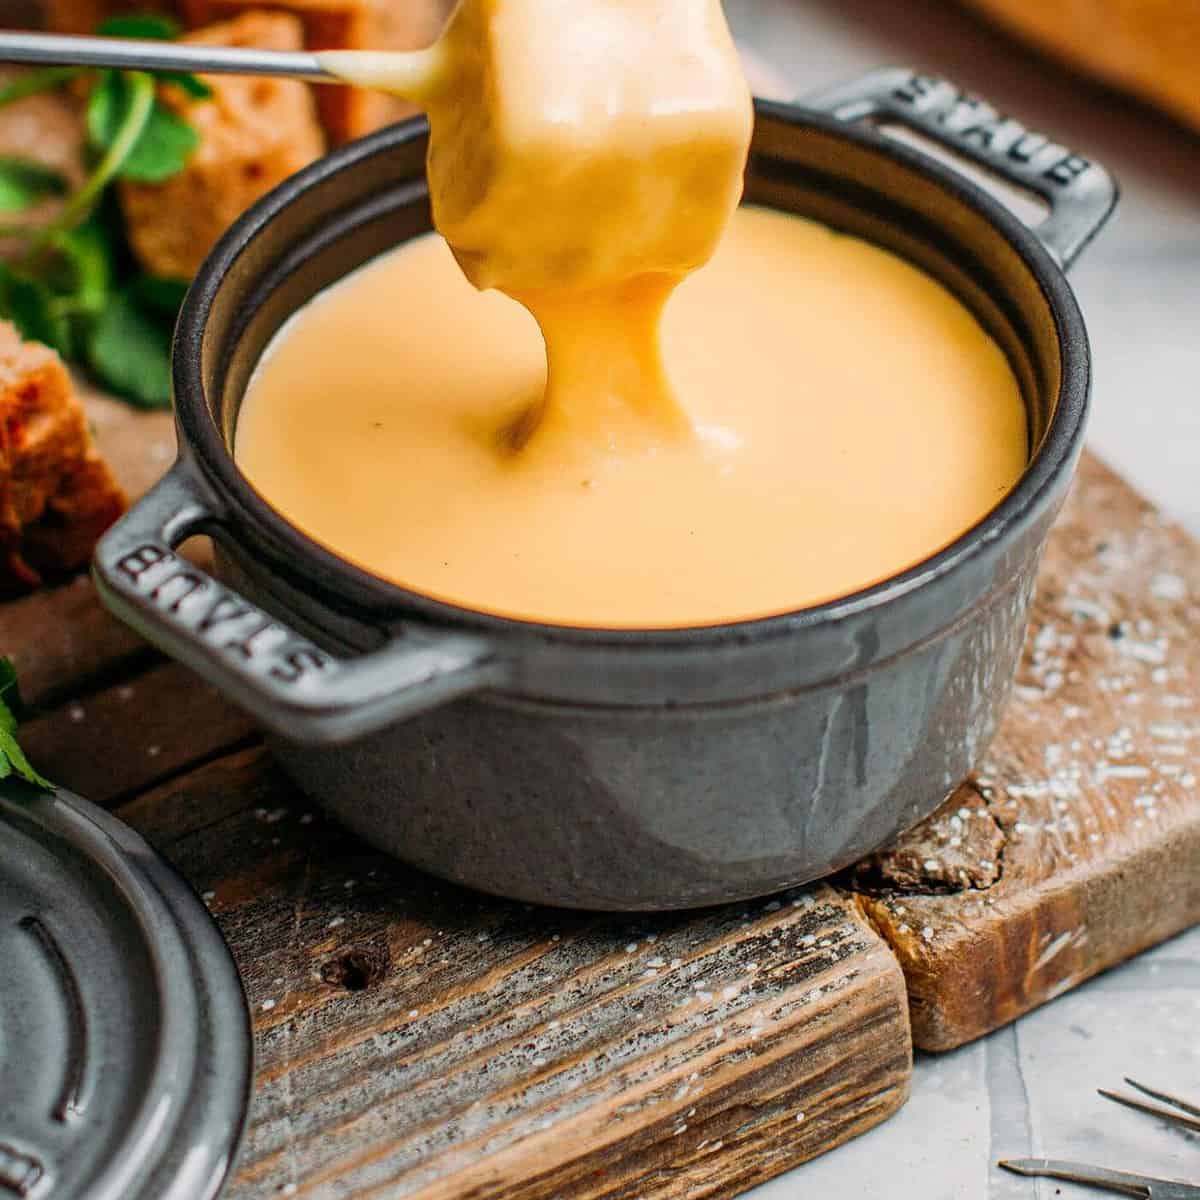  Indulge in this plant-based fondue without any guilt.